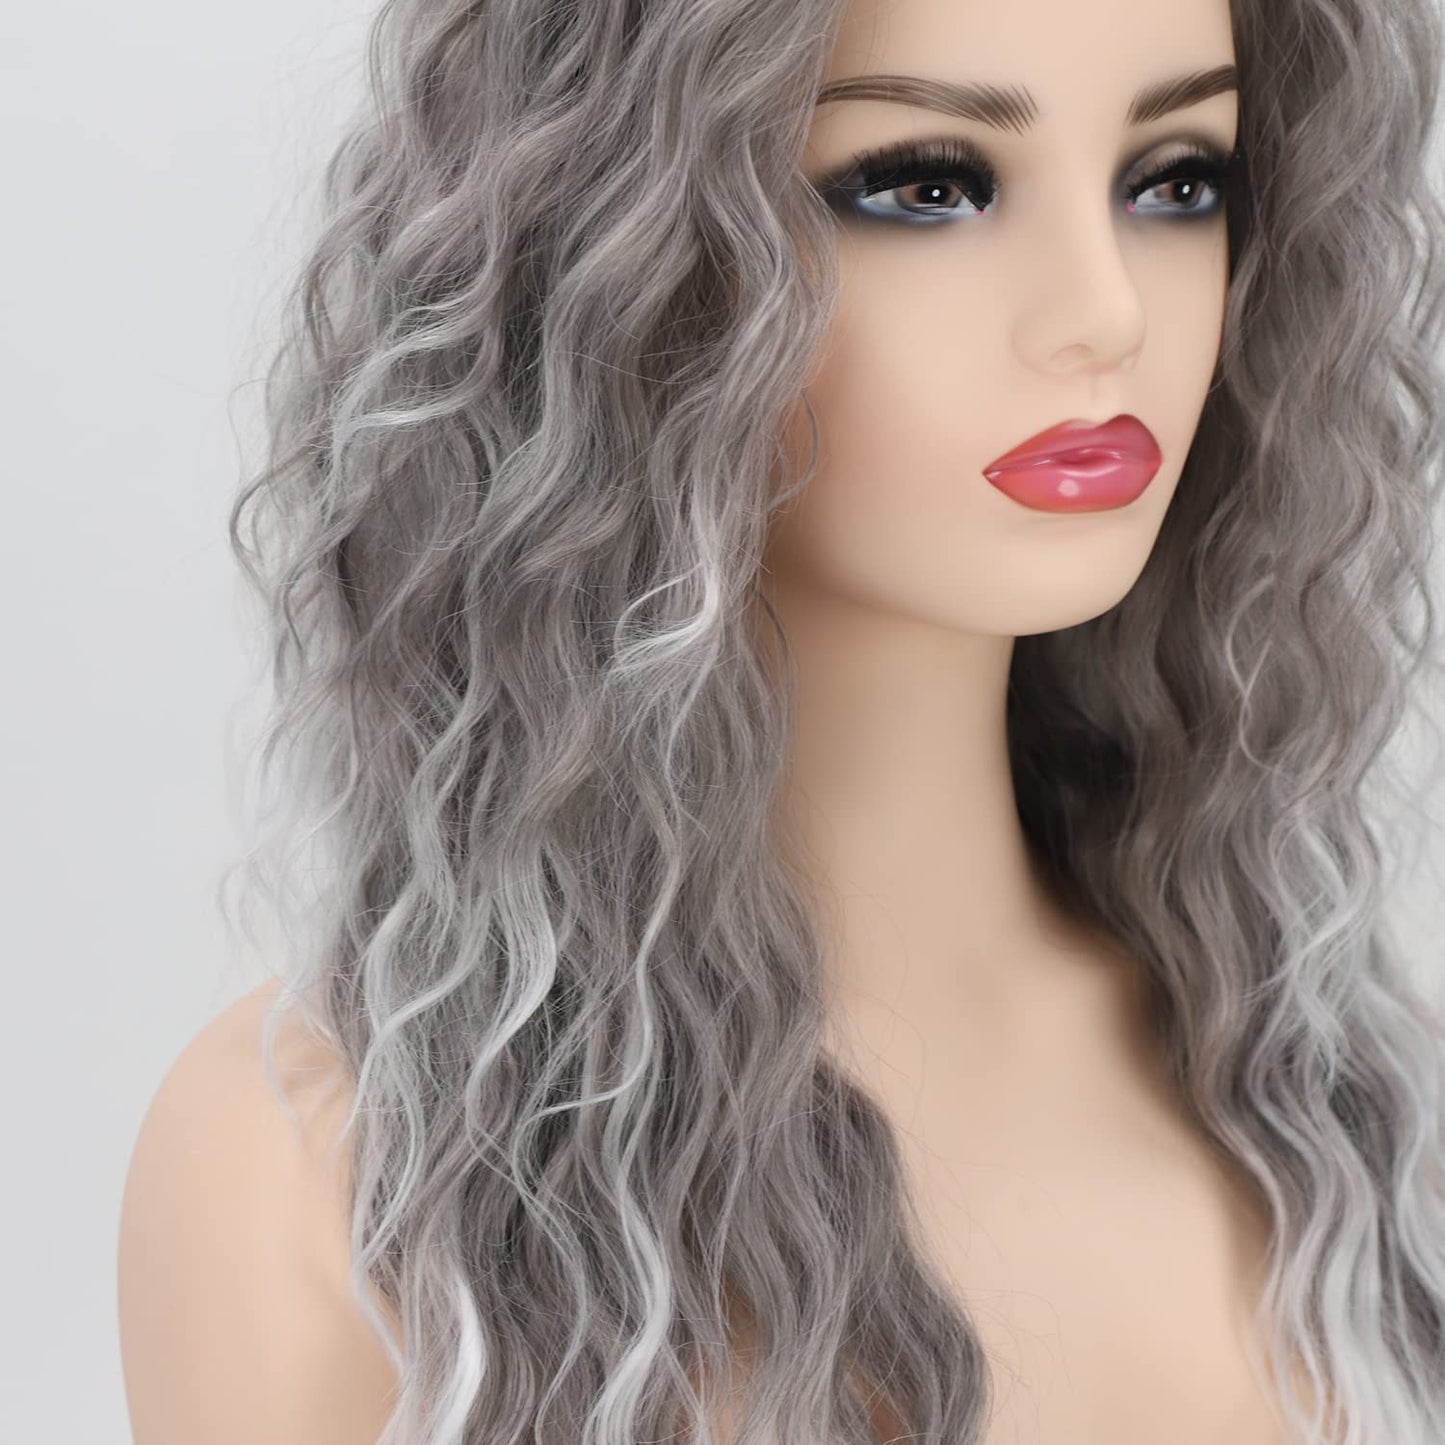 Fencca Grey Long Curly Wig Synthetic Mixed Gray Wave Curly Wigs for Women Free Part Full Curly Wig Layered Long Wavy Grey Wig